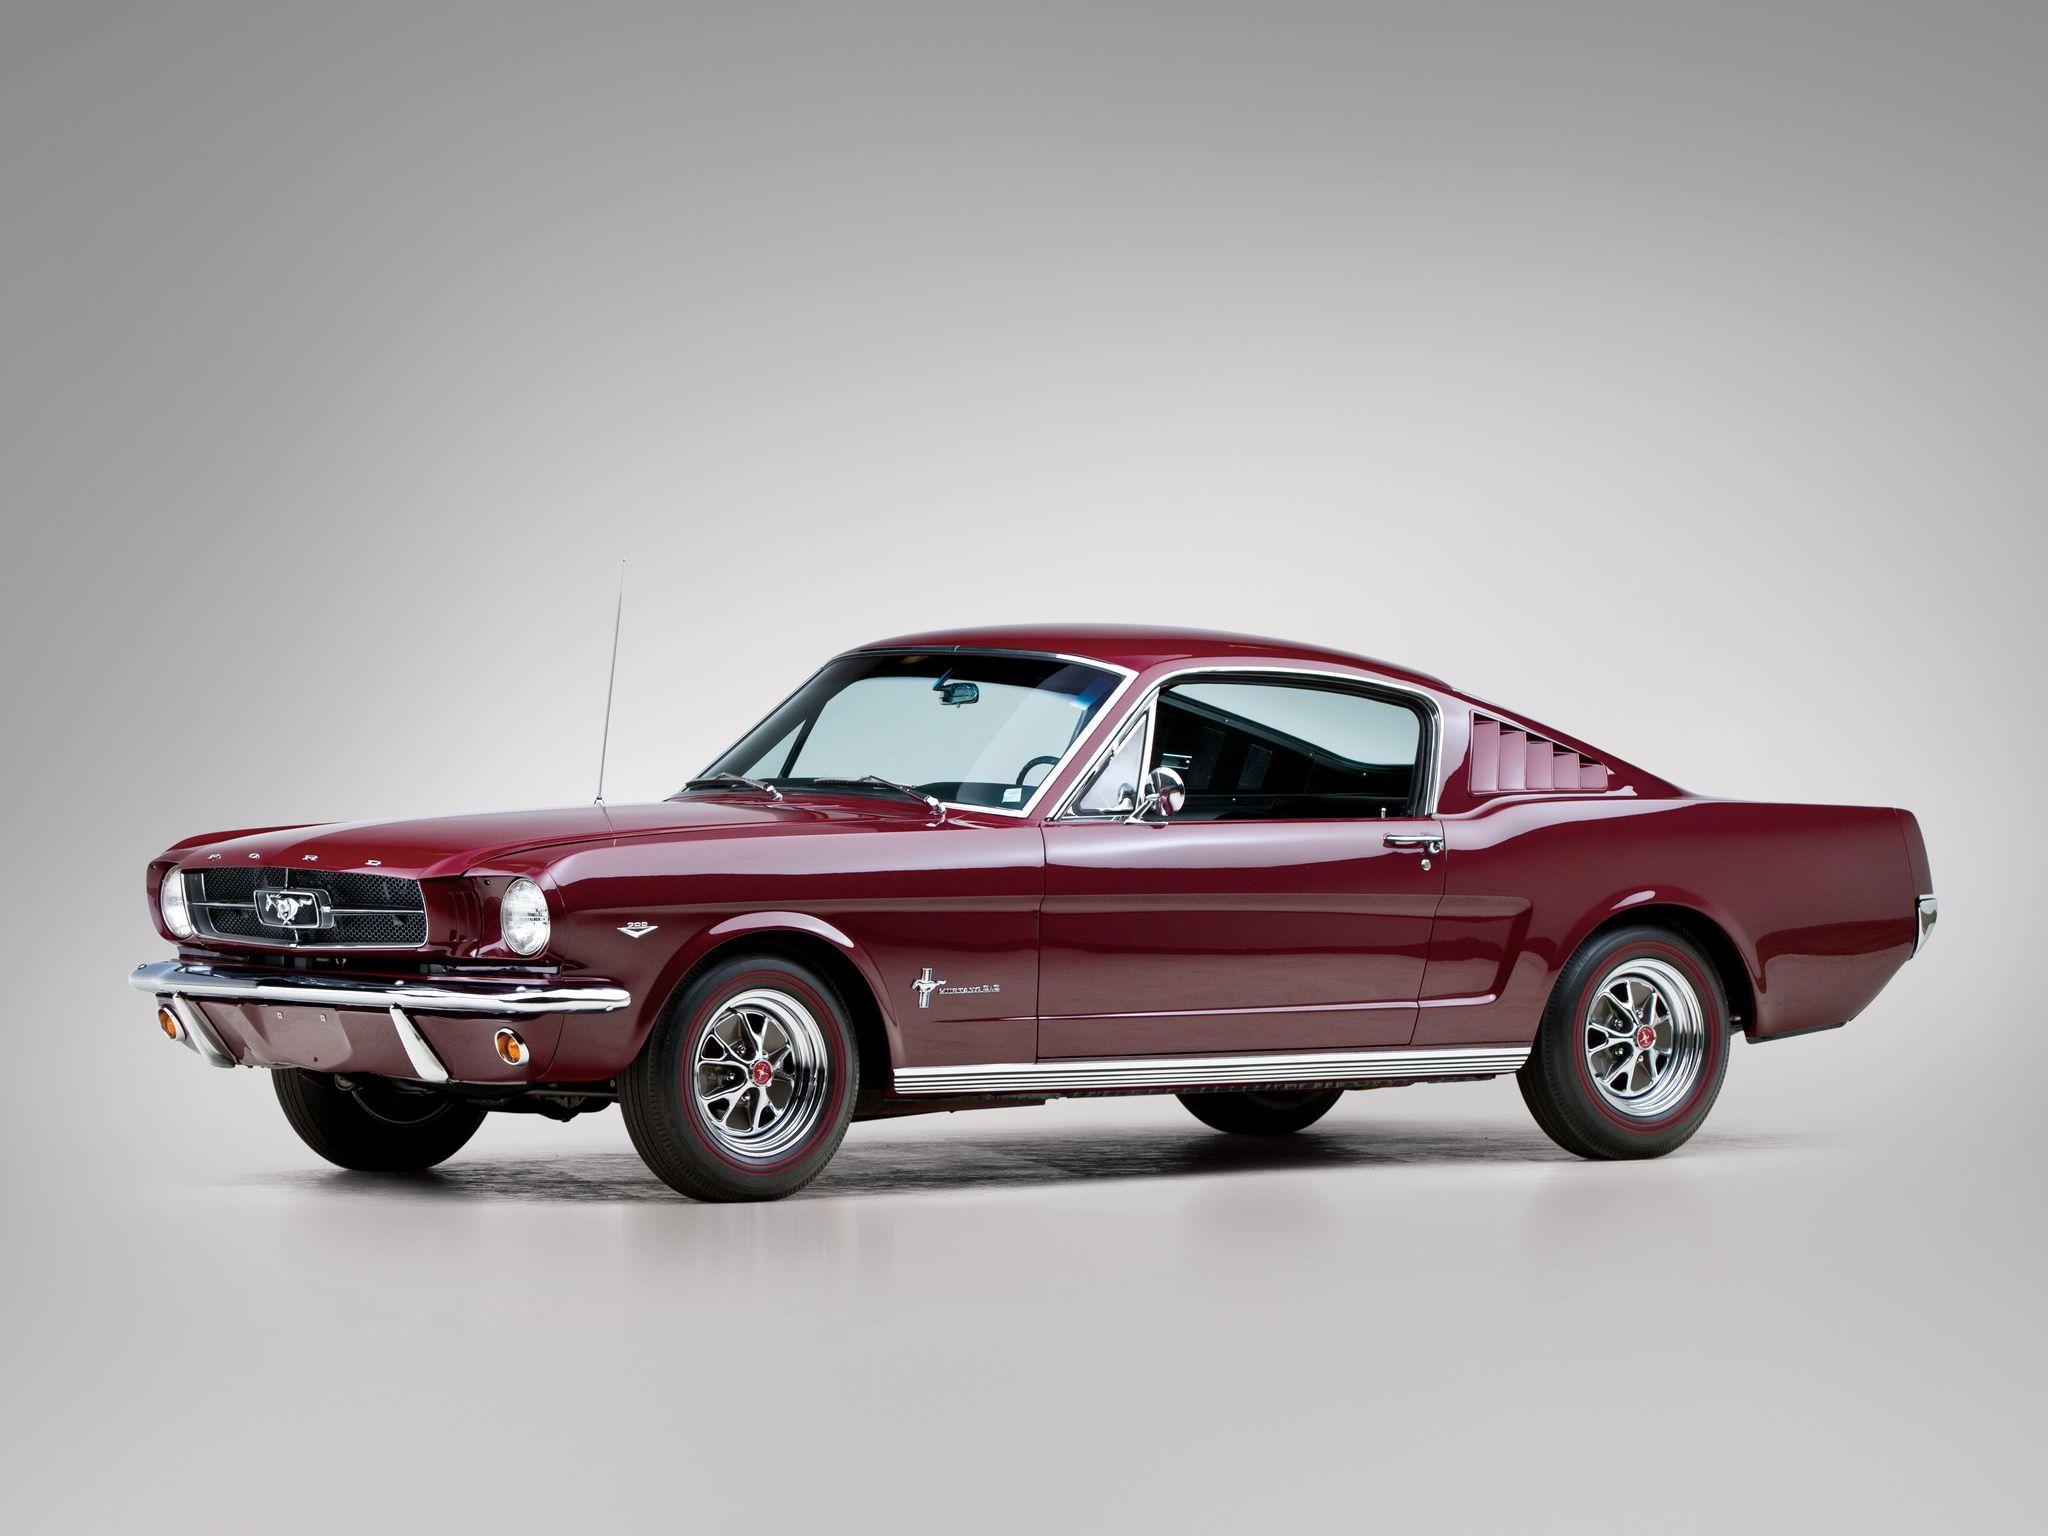 Ford Mustang Fastback muscle classic fs wallpaperx1536